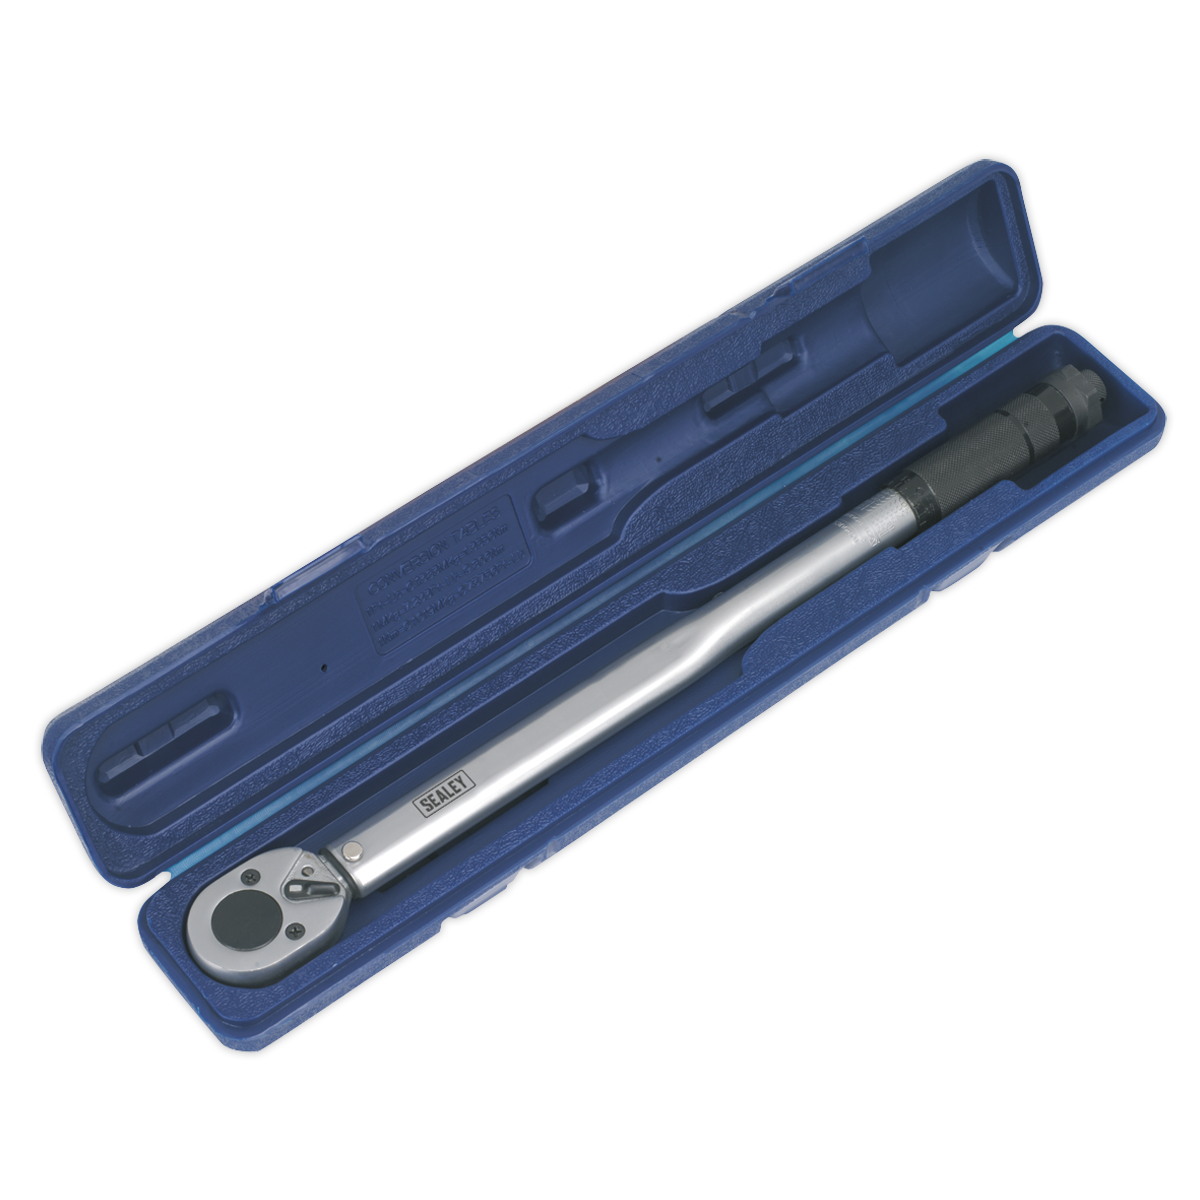 Micrometer Torque Wrench 1/2"Sq Drive Calibrated | Heat treated steel ratchet head. | toolforce.ie